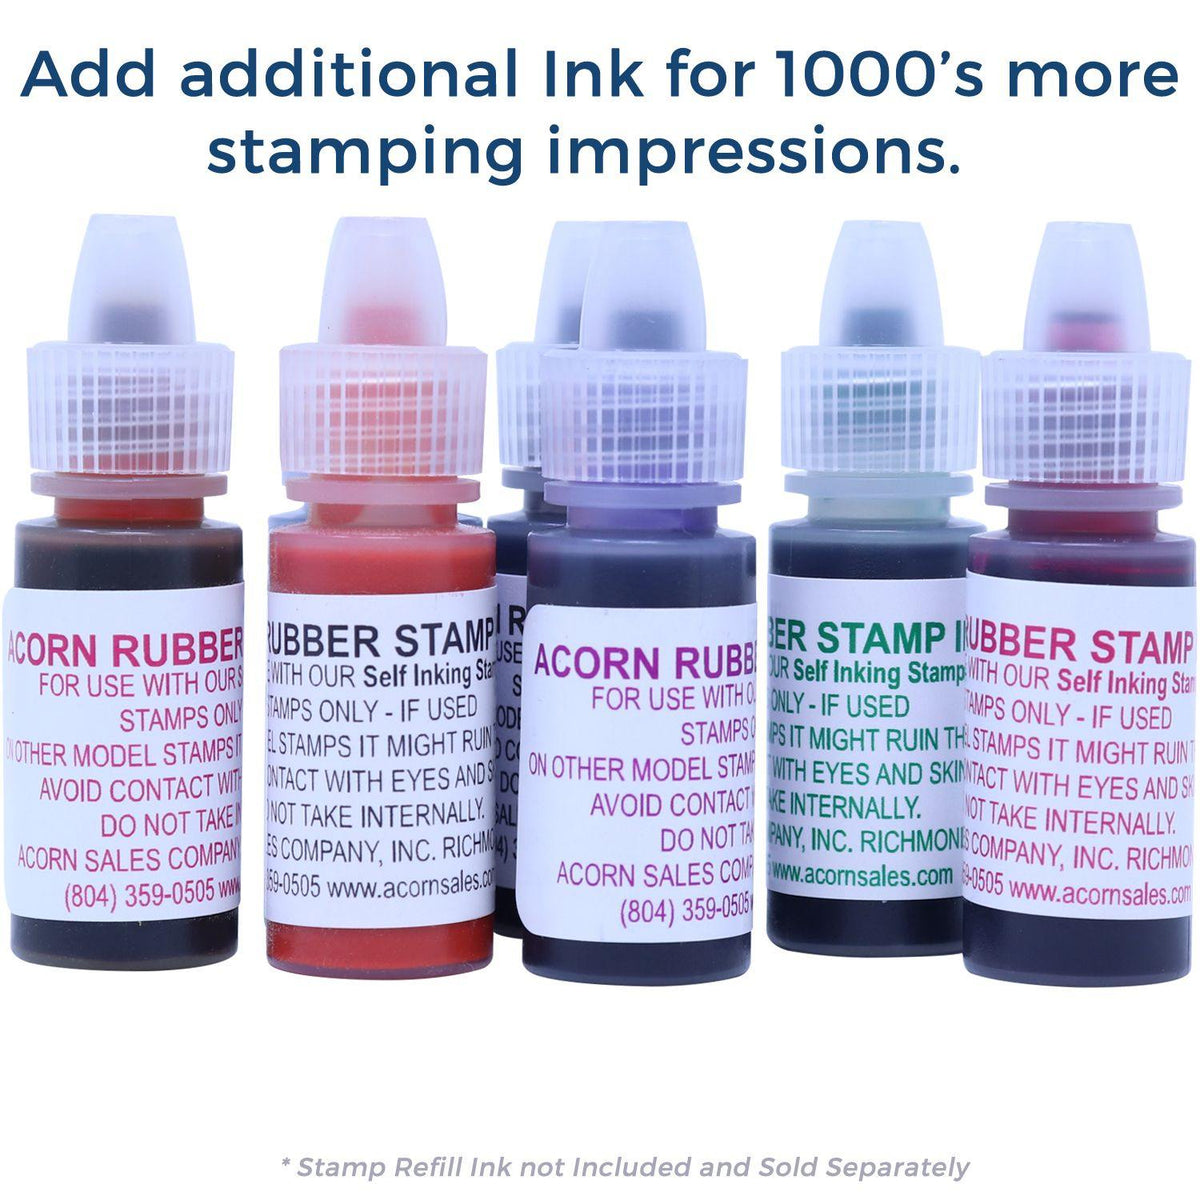 Refill Inks for Large Pre-Inked Covid-19 Test Pending Stamp Available